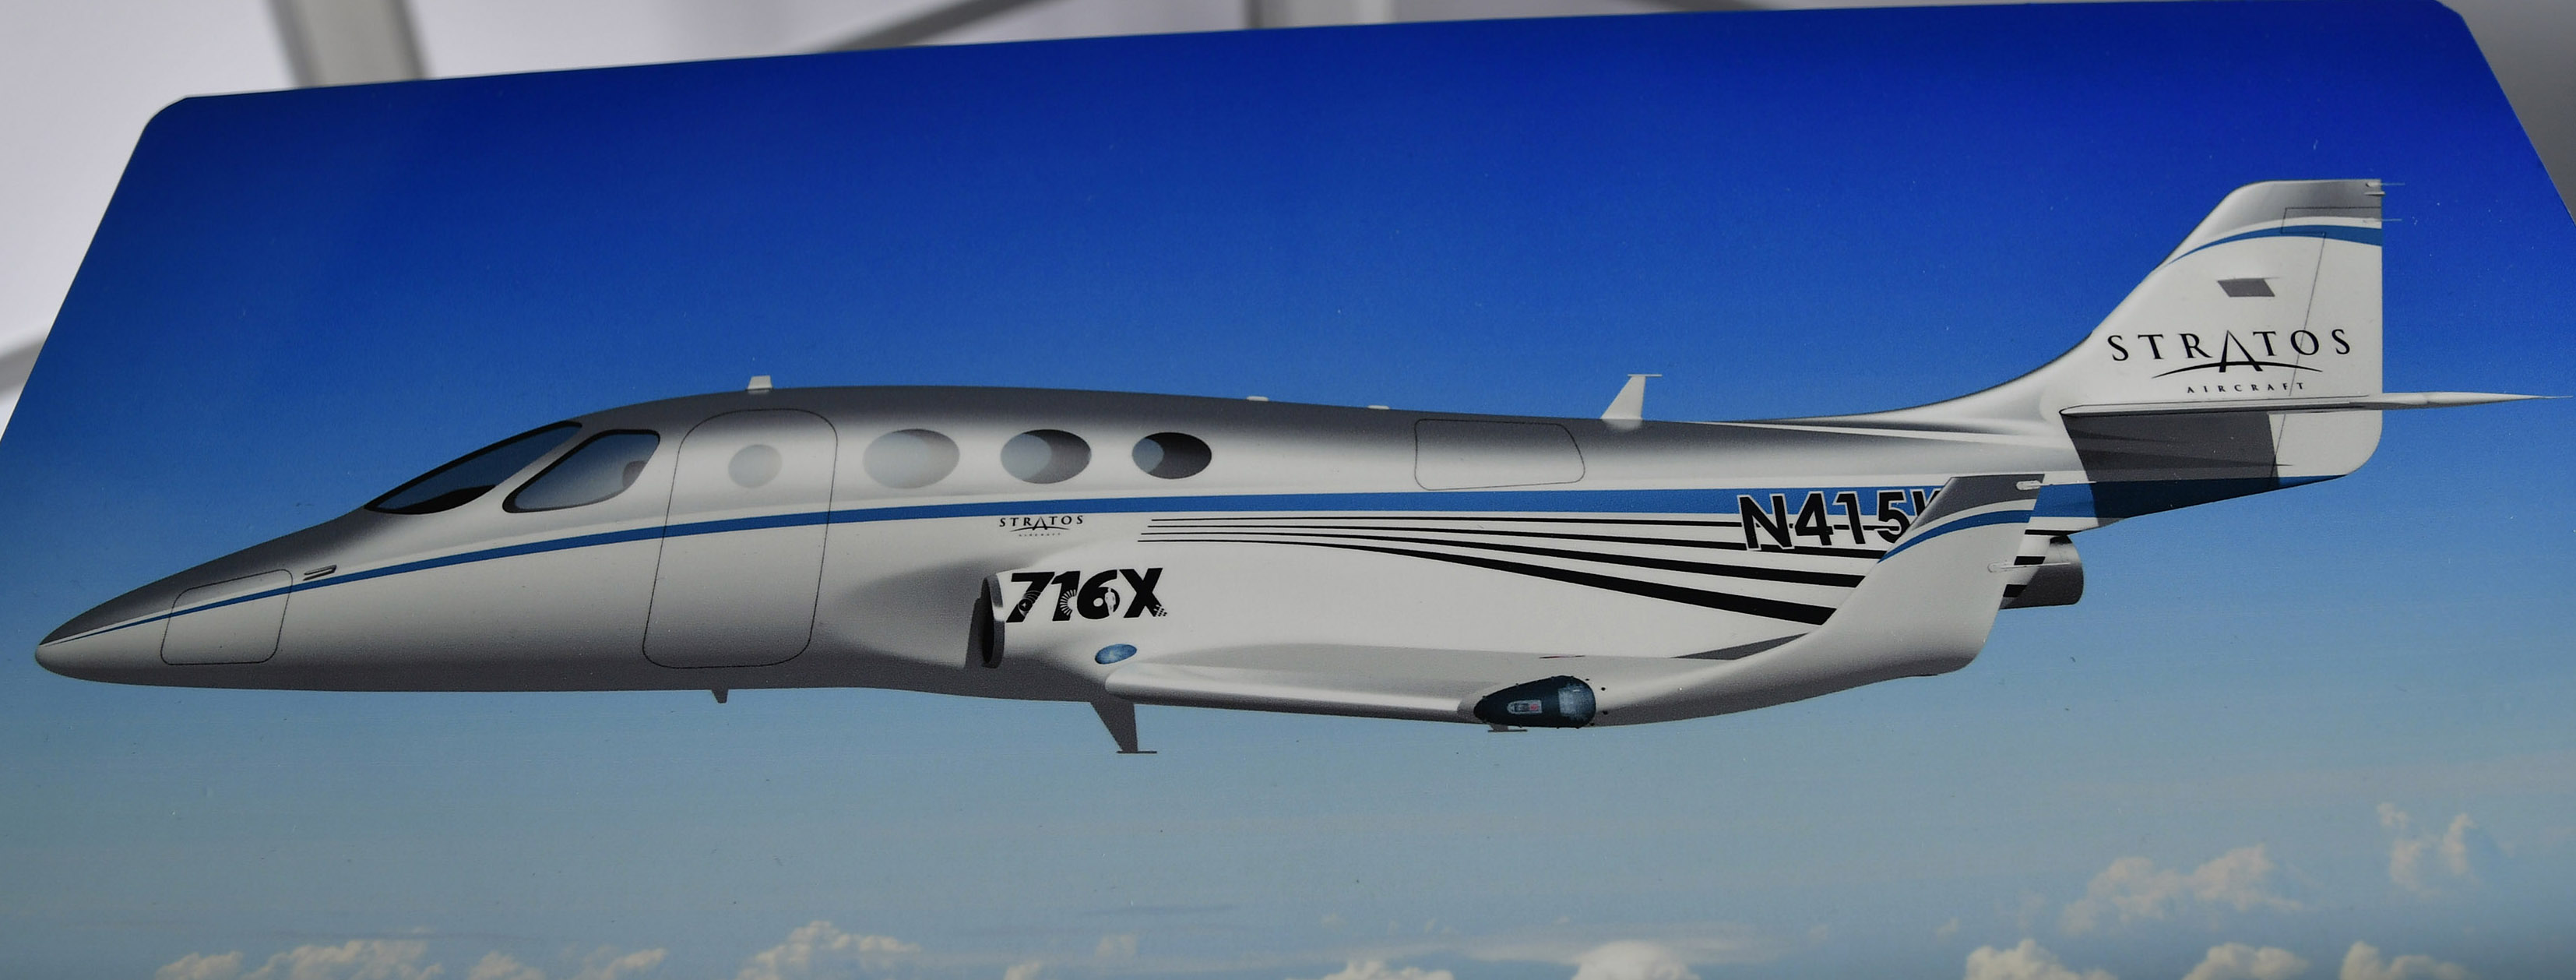 A drawing of a Stratos 716X shows the twin jet's stretched cabin during EAA AirVenture at Wittman Regional Airport in Oshkosh, Wisconsin, July 23, 2018. Photo by David Tulis.